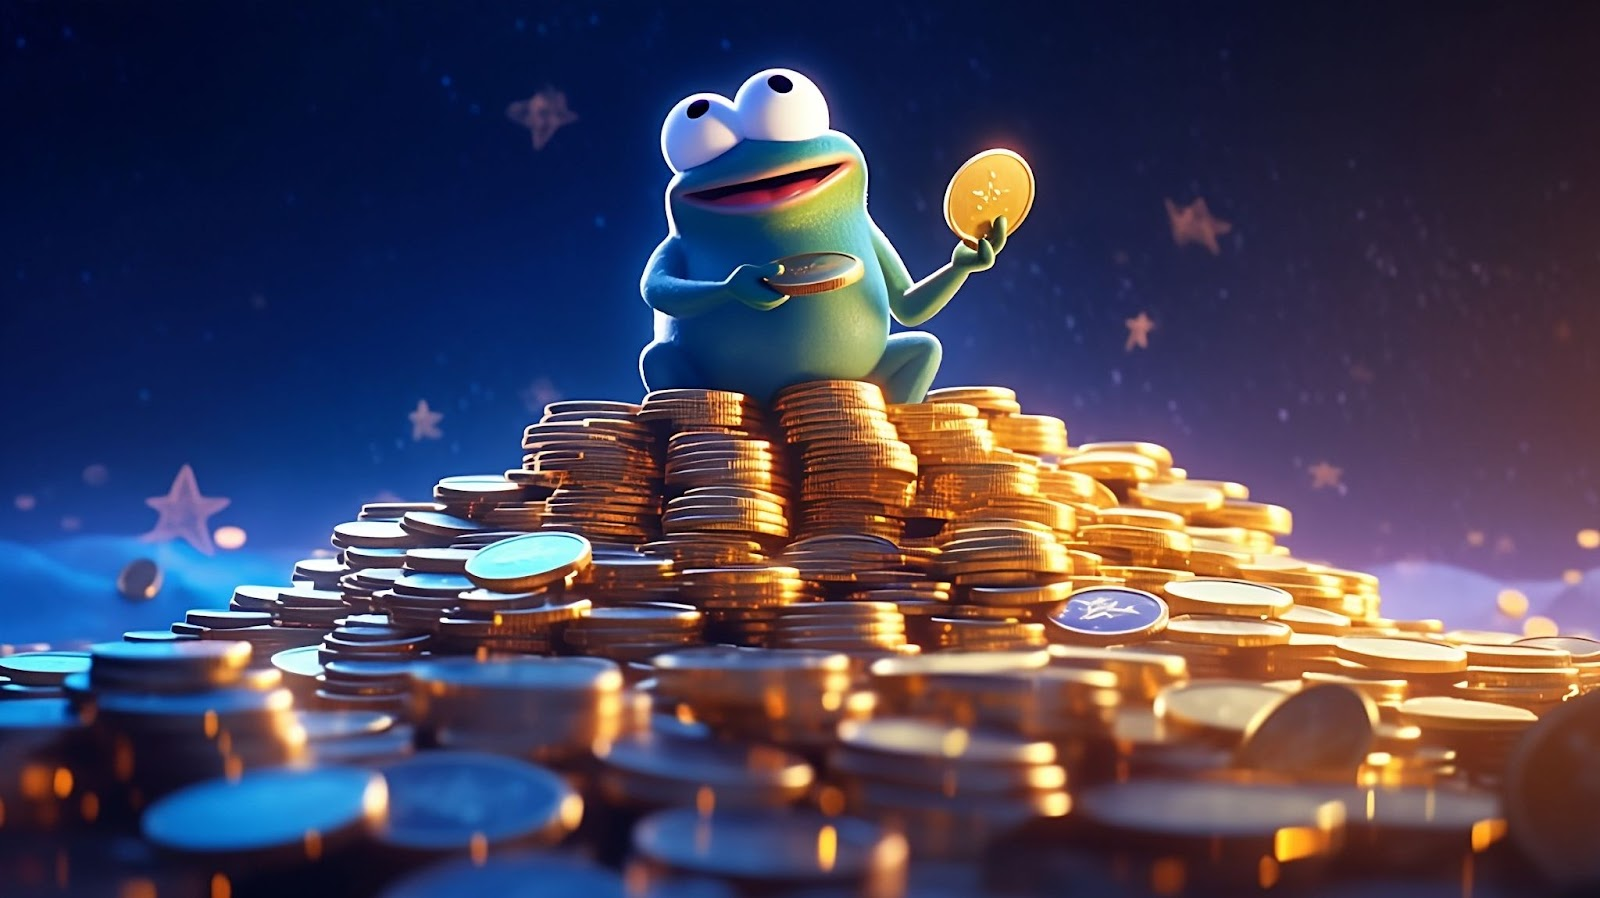 December Picks: 5 Meme Coins You Can’t Afford to Miss Out On